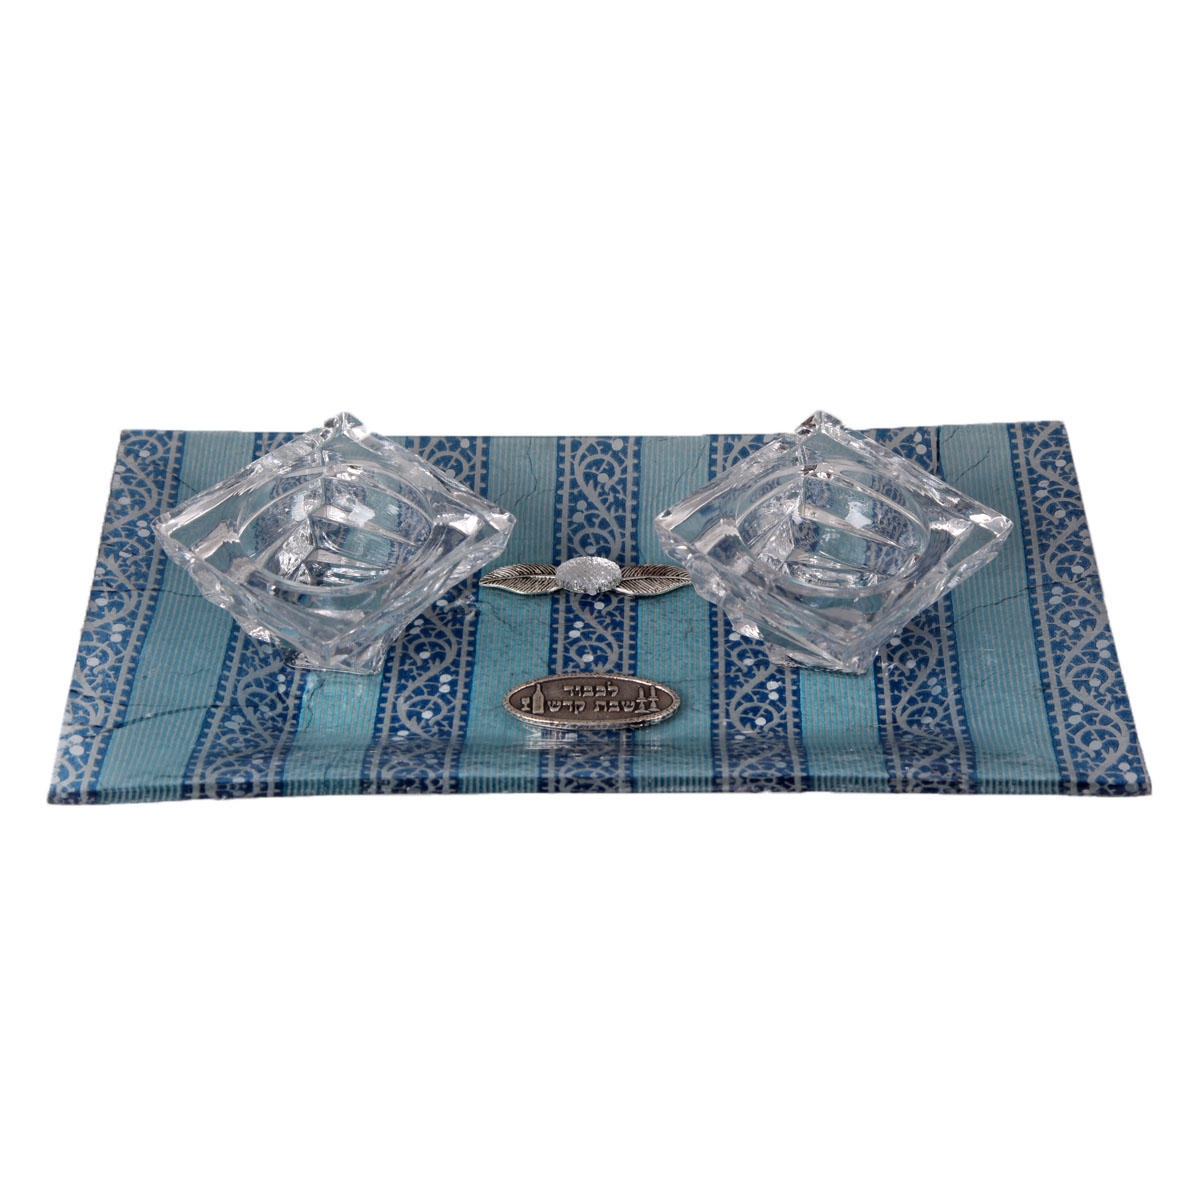 Blue & White Lace: Hand Decorated Glass Sabbath Candle Holders with Tray - 1